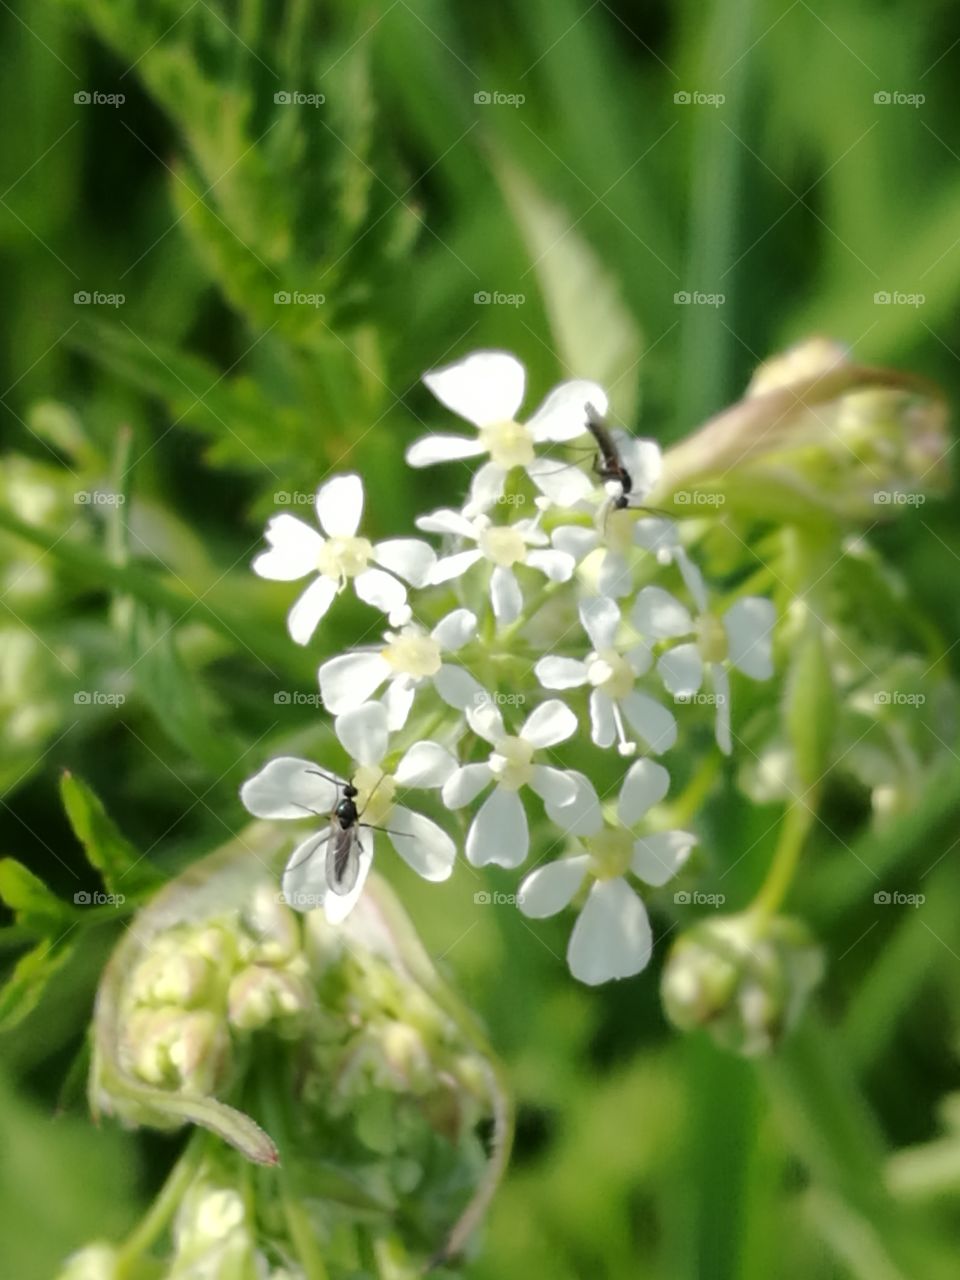 Small White Flowers With Insects